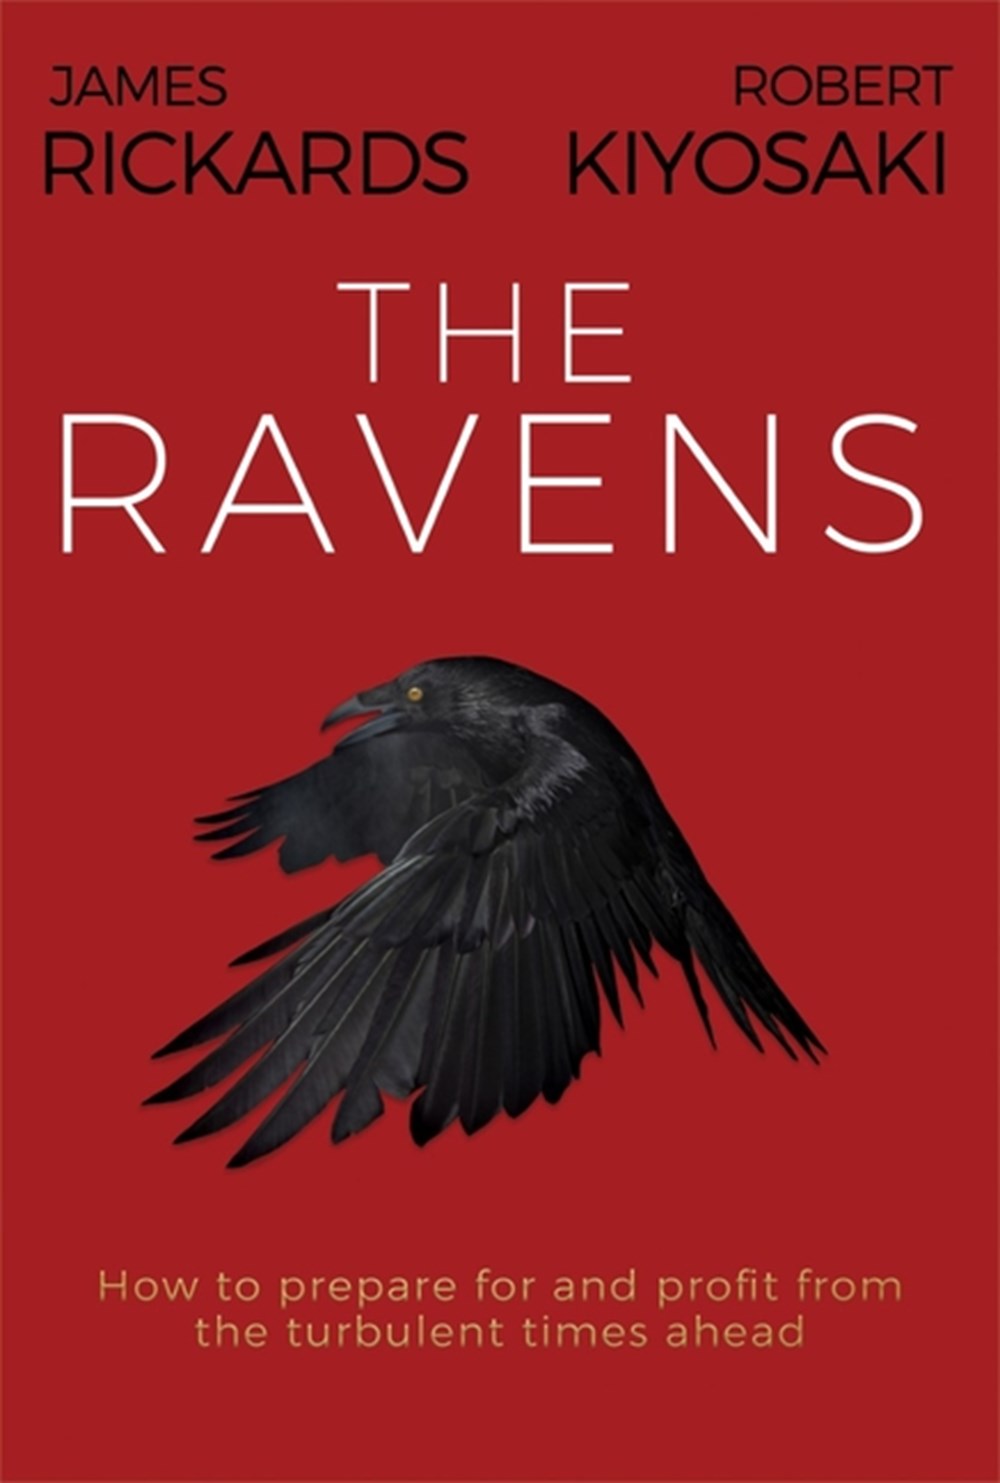 Ravens How to Prepare for and Profit from the Turbulent Times Ahead